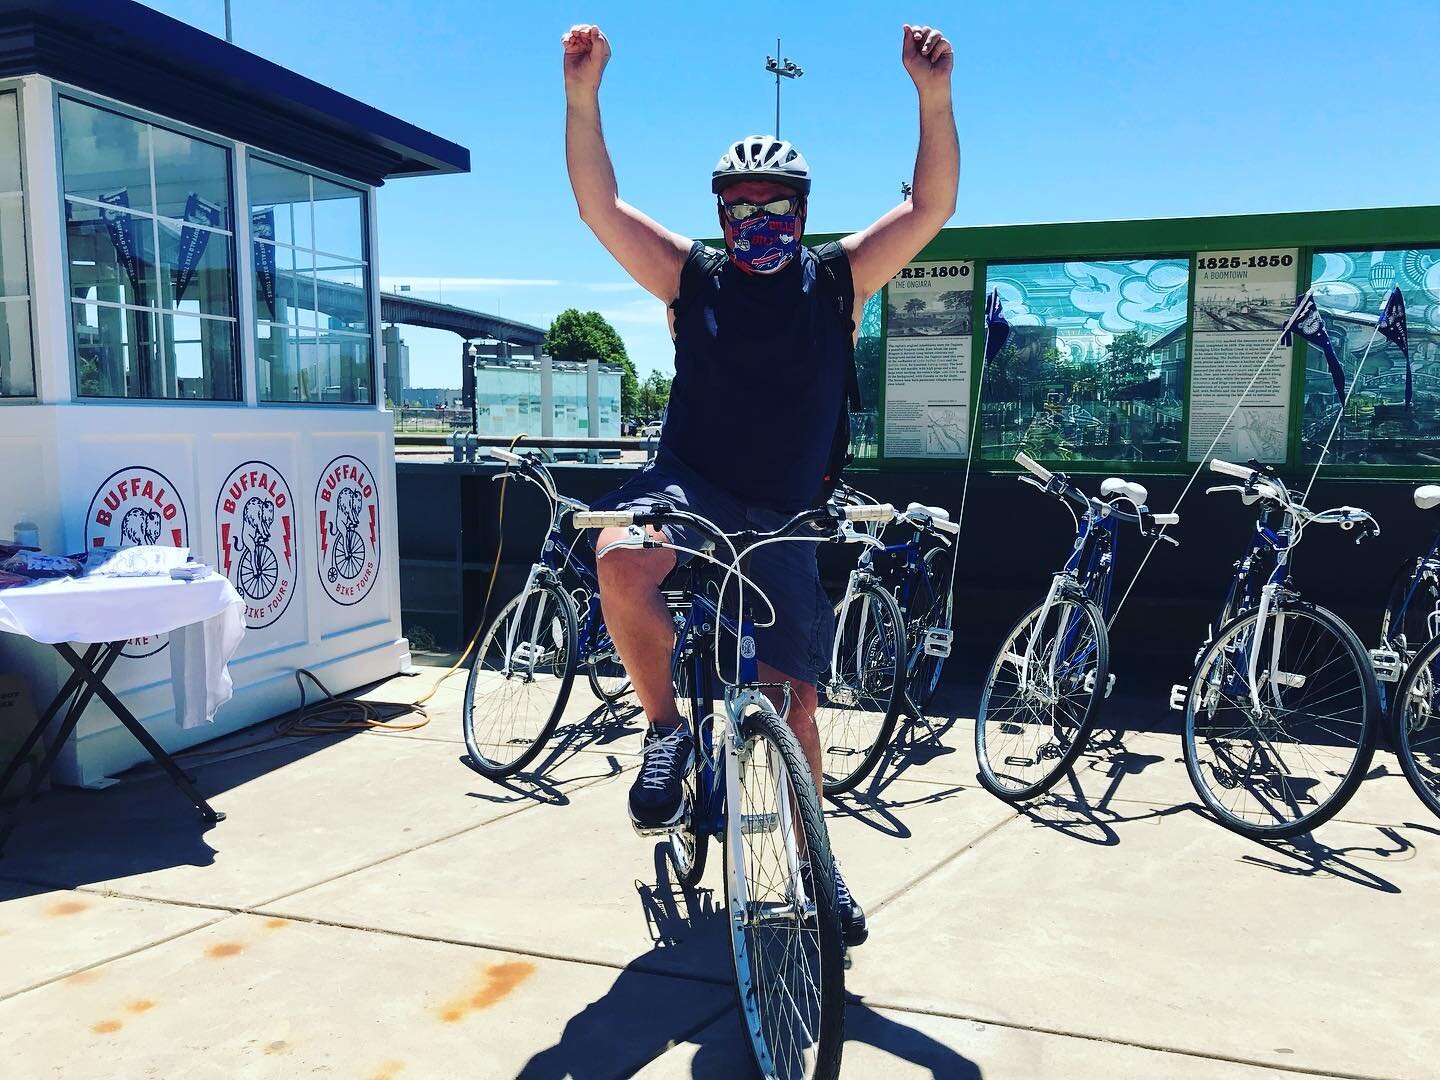 How To Find the Rentals in — Buffalo Bike Tours